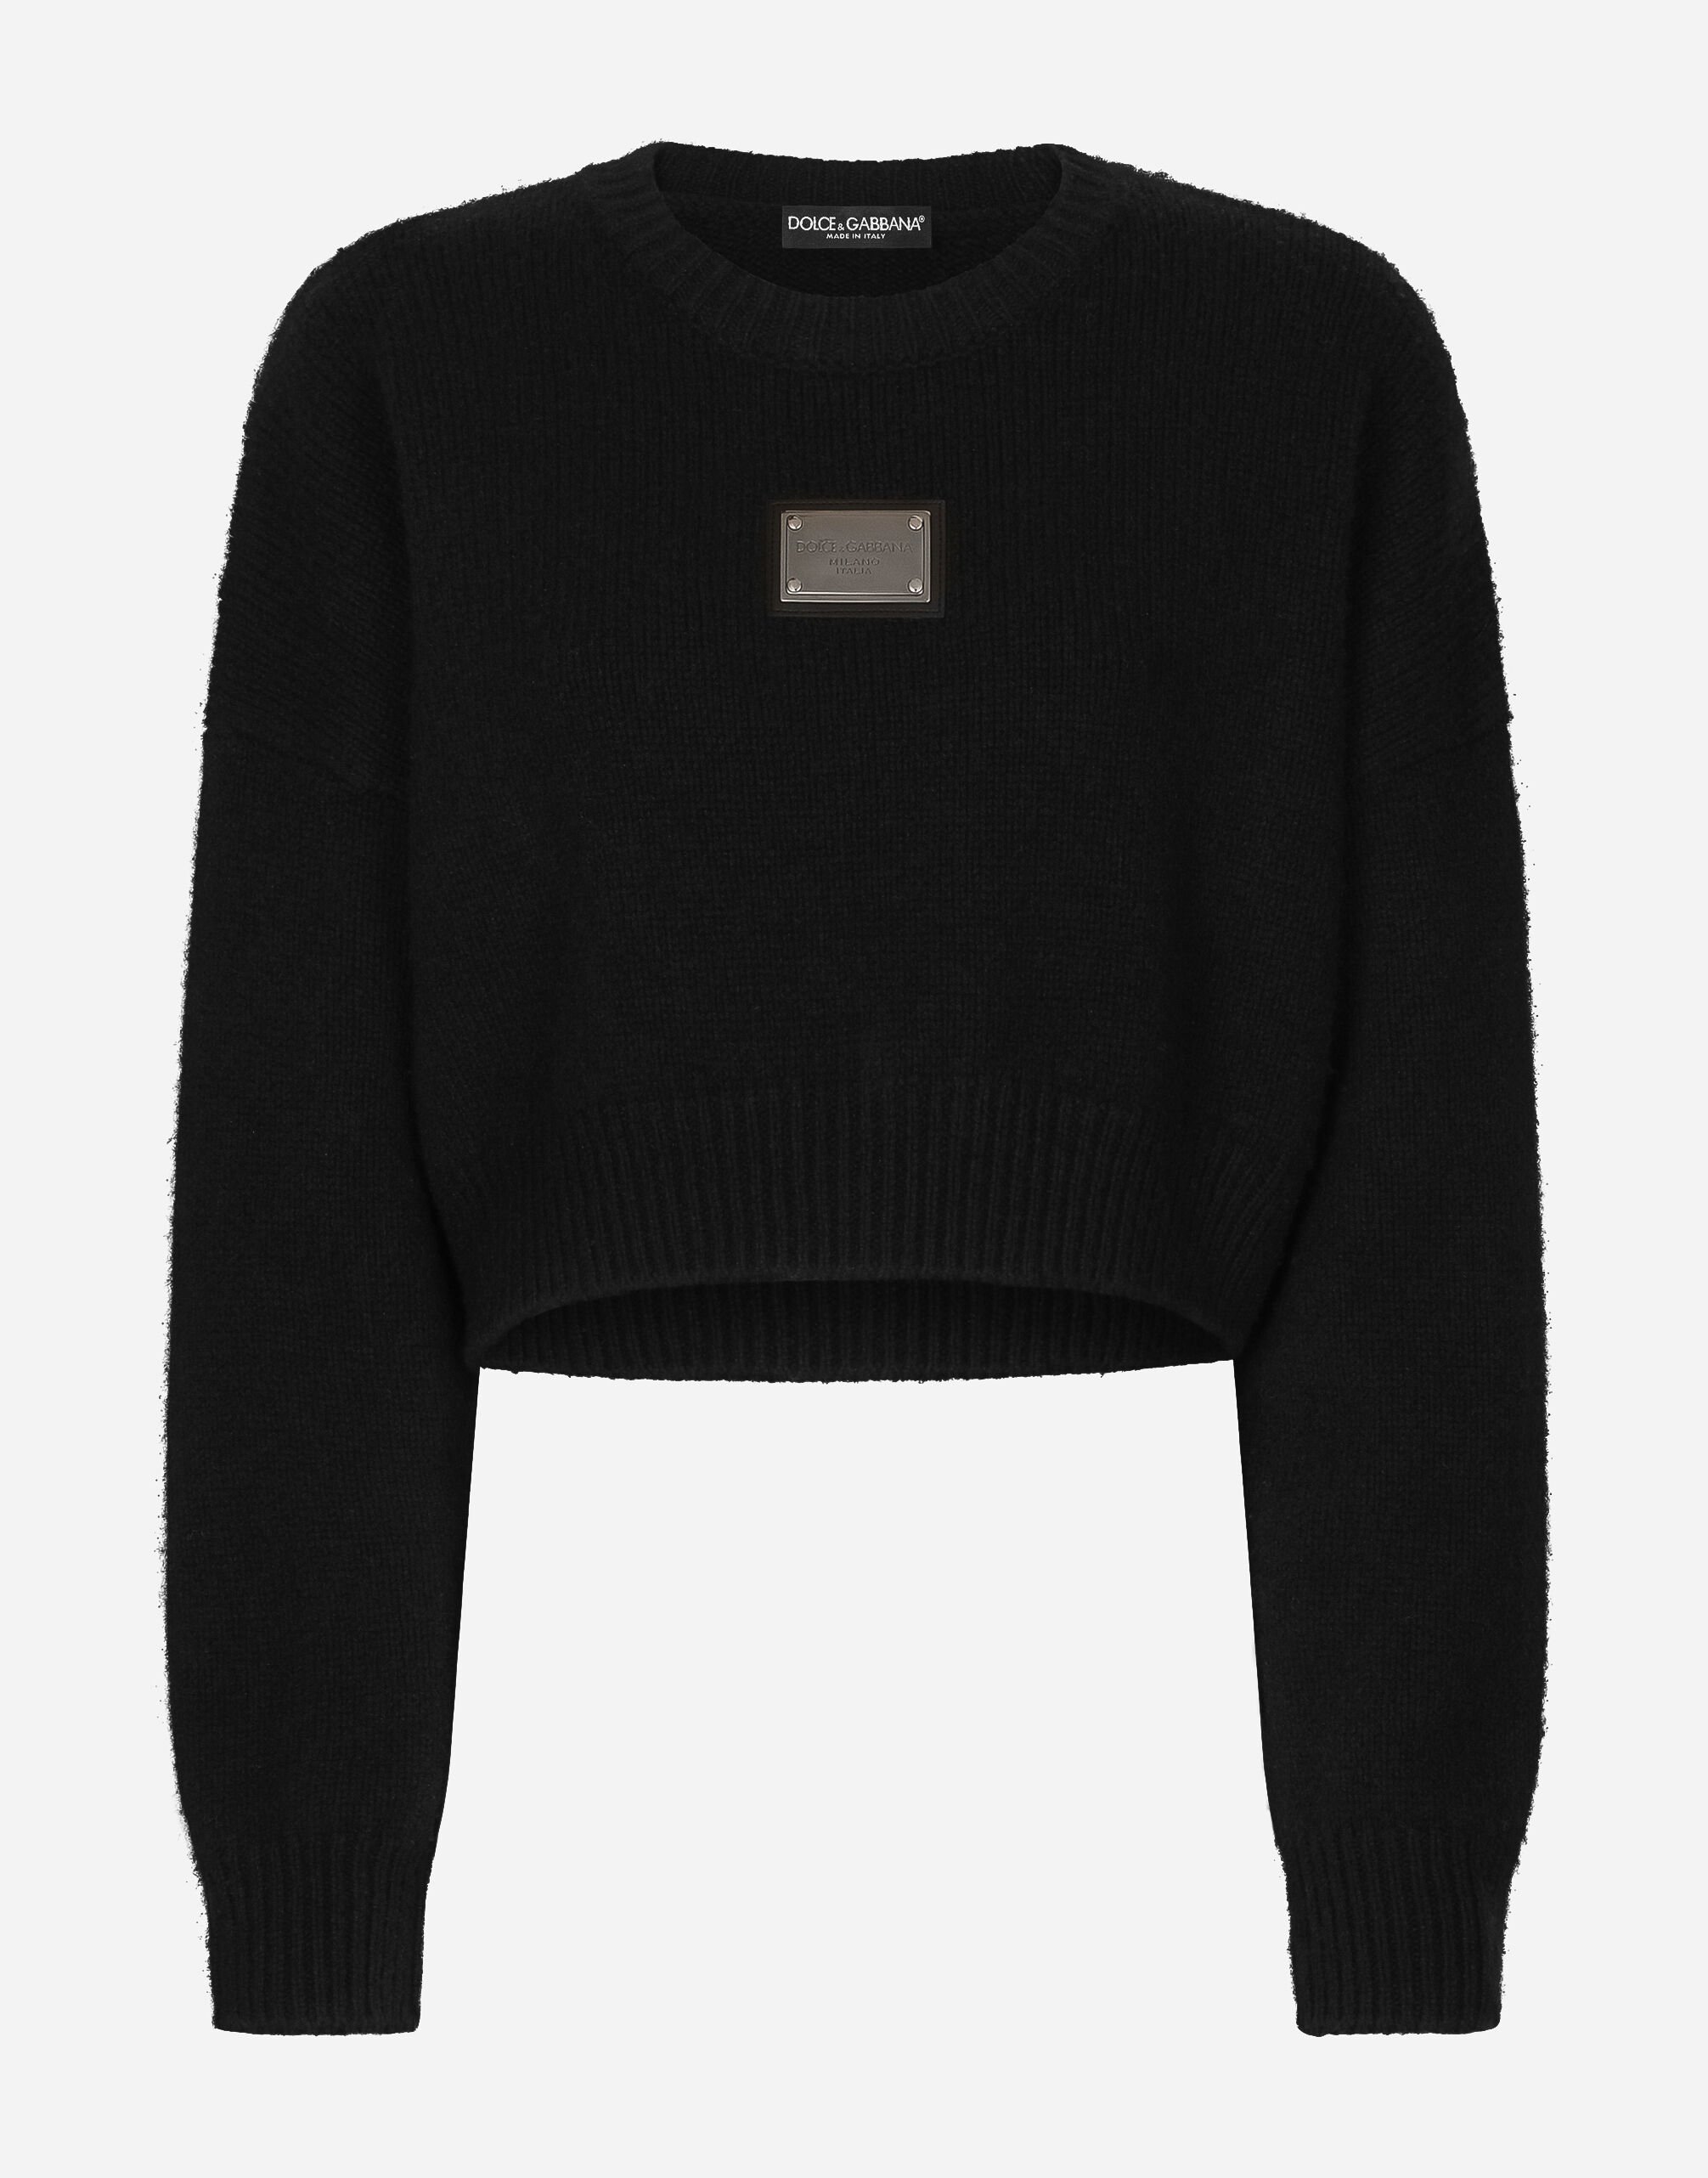 Dolce & Gabbana Wool and cashmere round-neck sweater with logo tag Multicolor FXM38TJCVP3